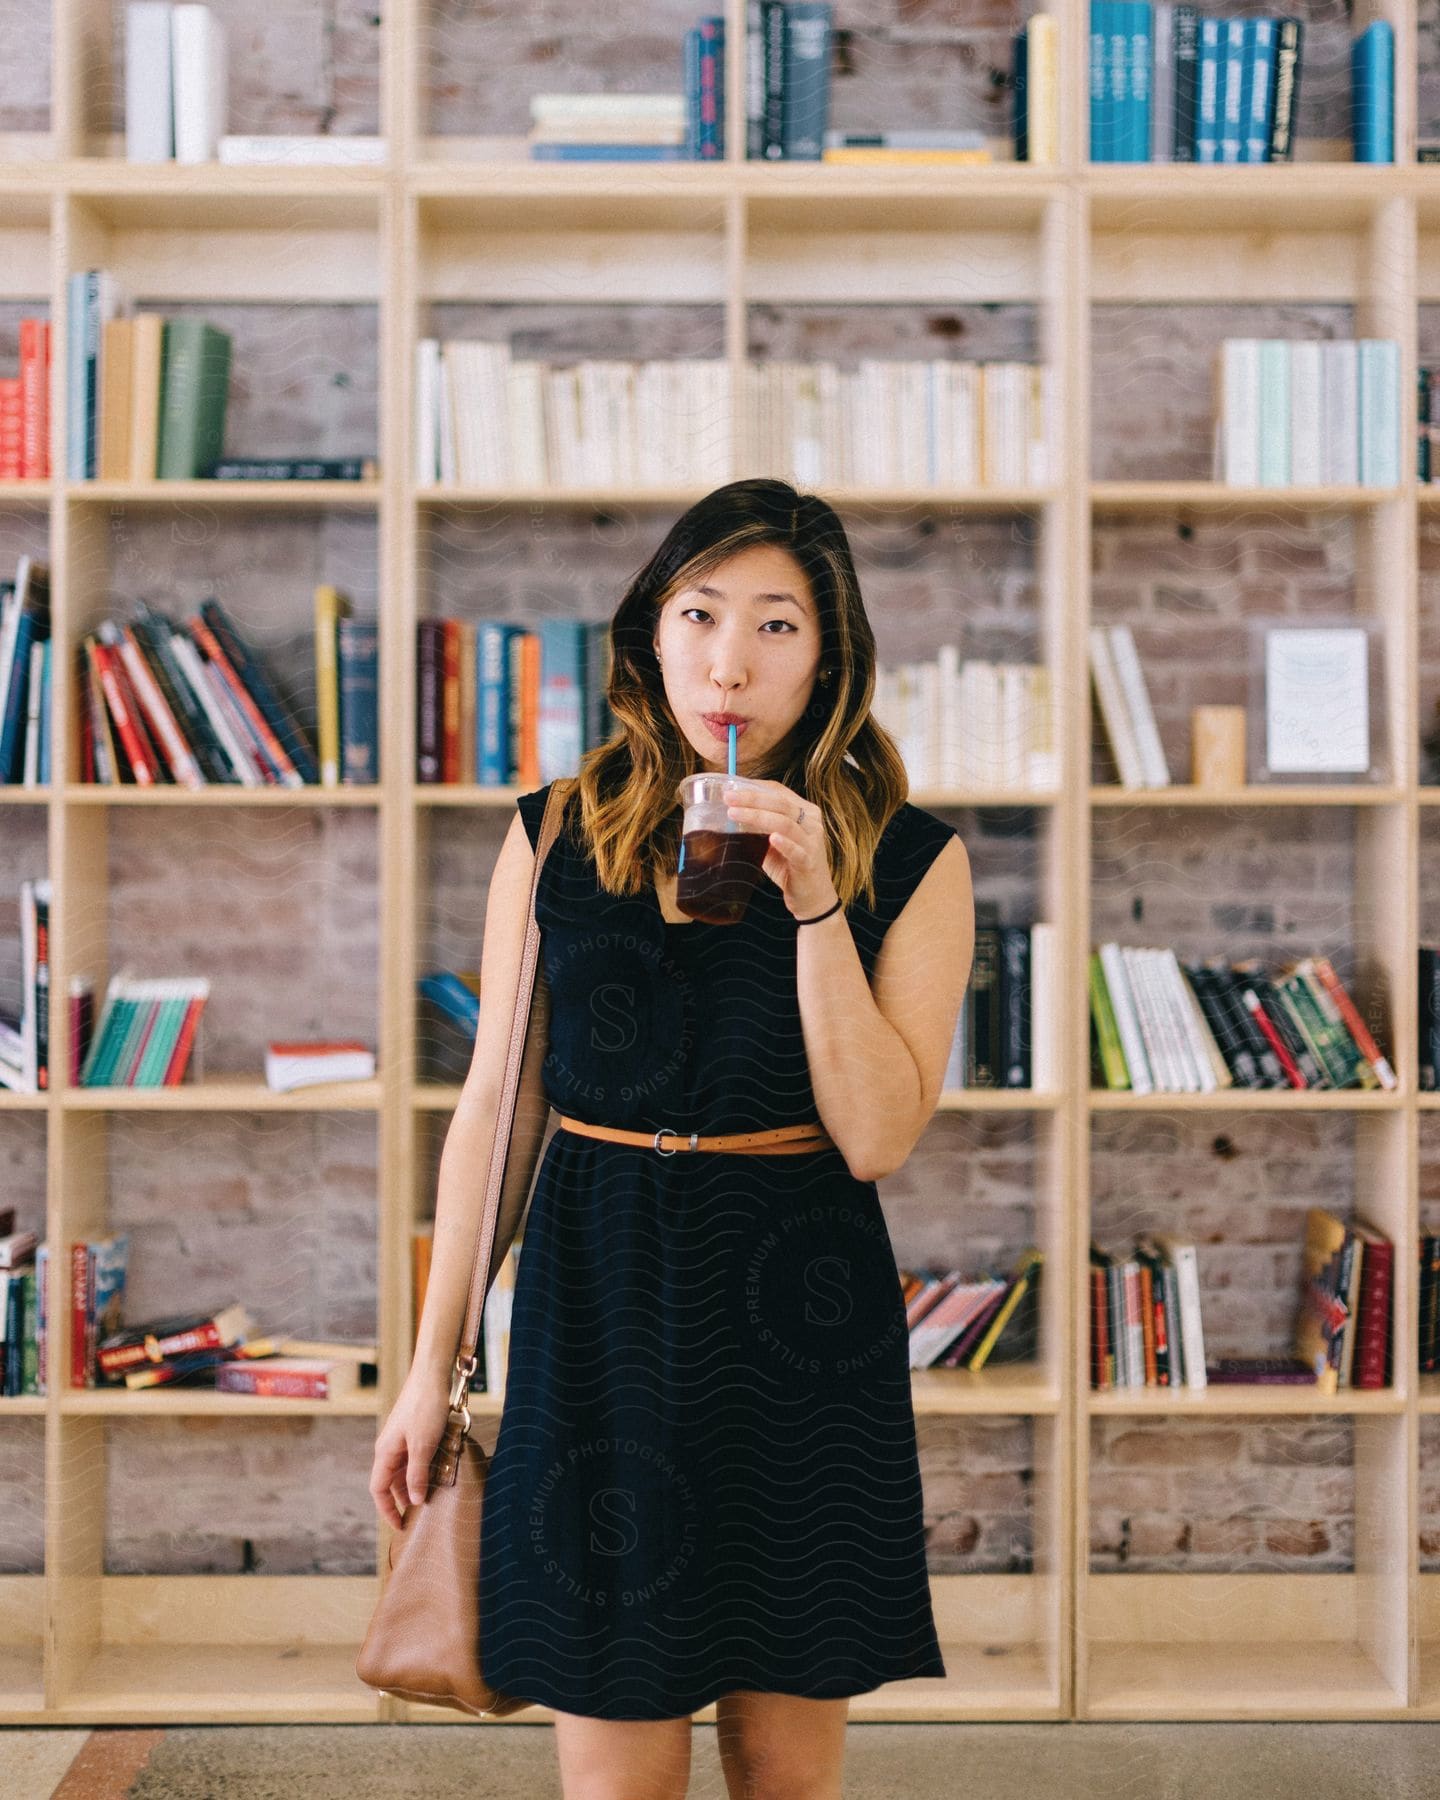 A woman holding a cup of iced coffee in a library